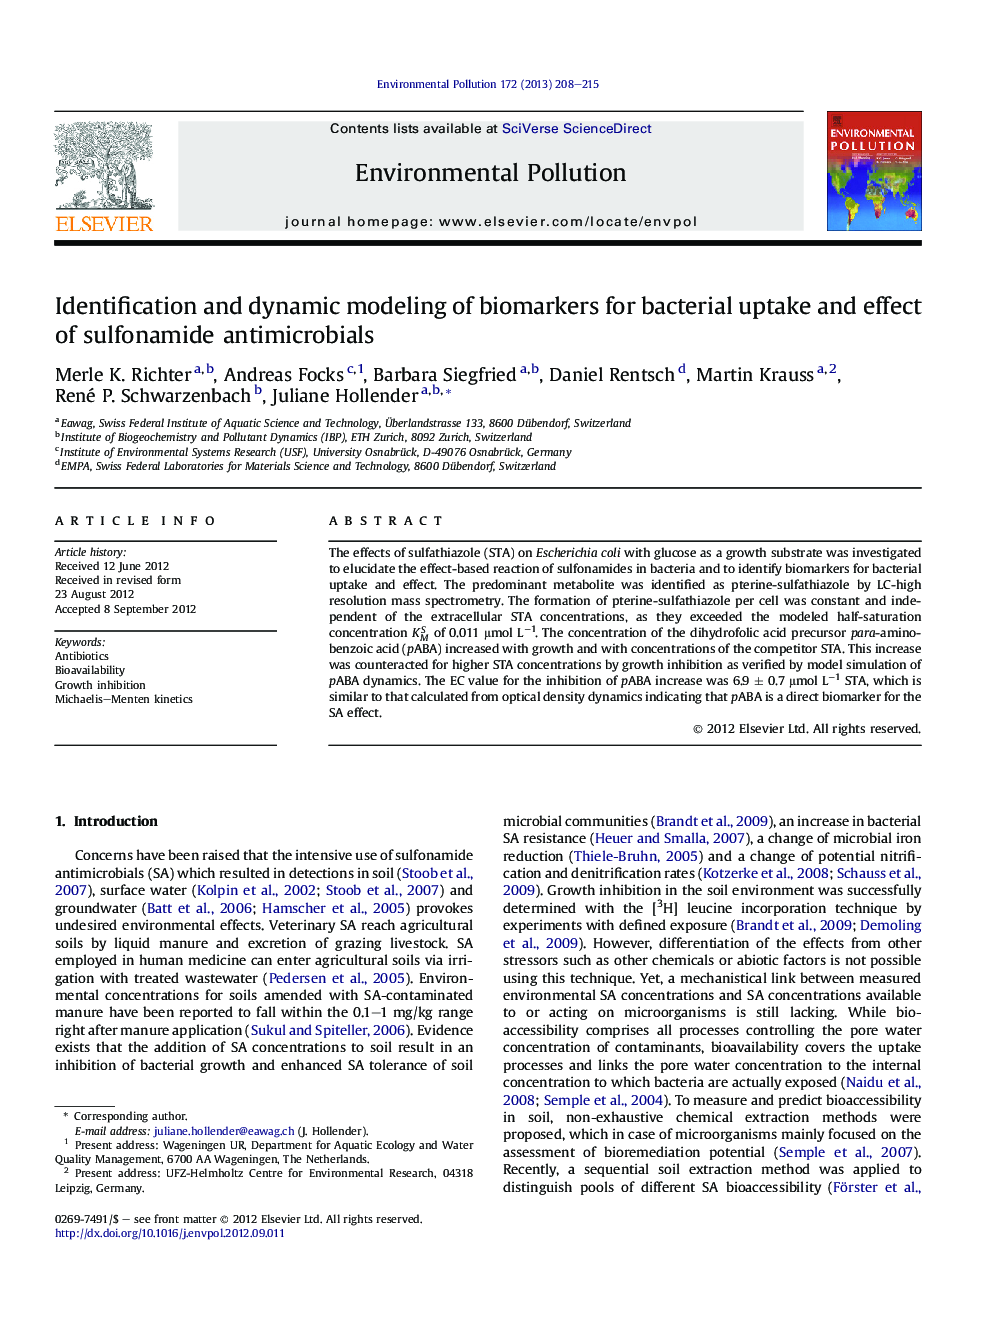 Identification and dynamic modeling of biomarkers for bacterial uptake and effect of sulfonamide antimicrobials